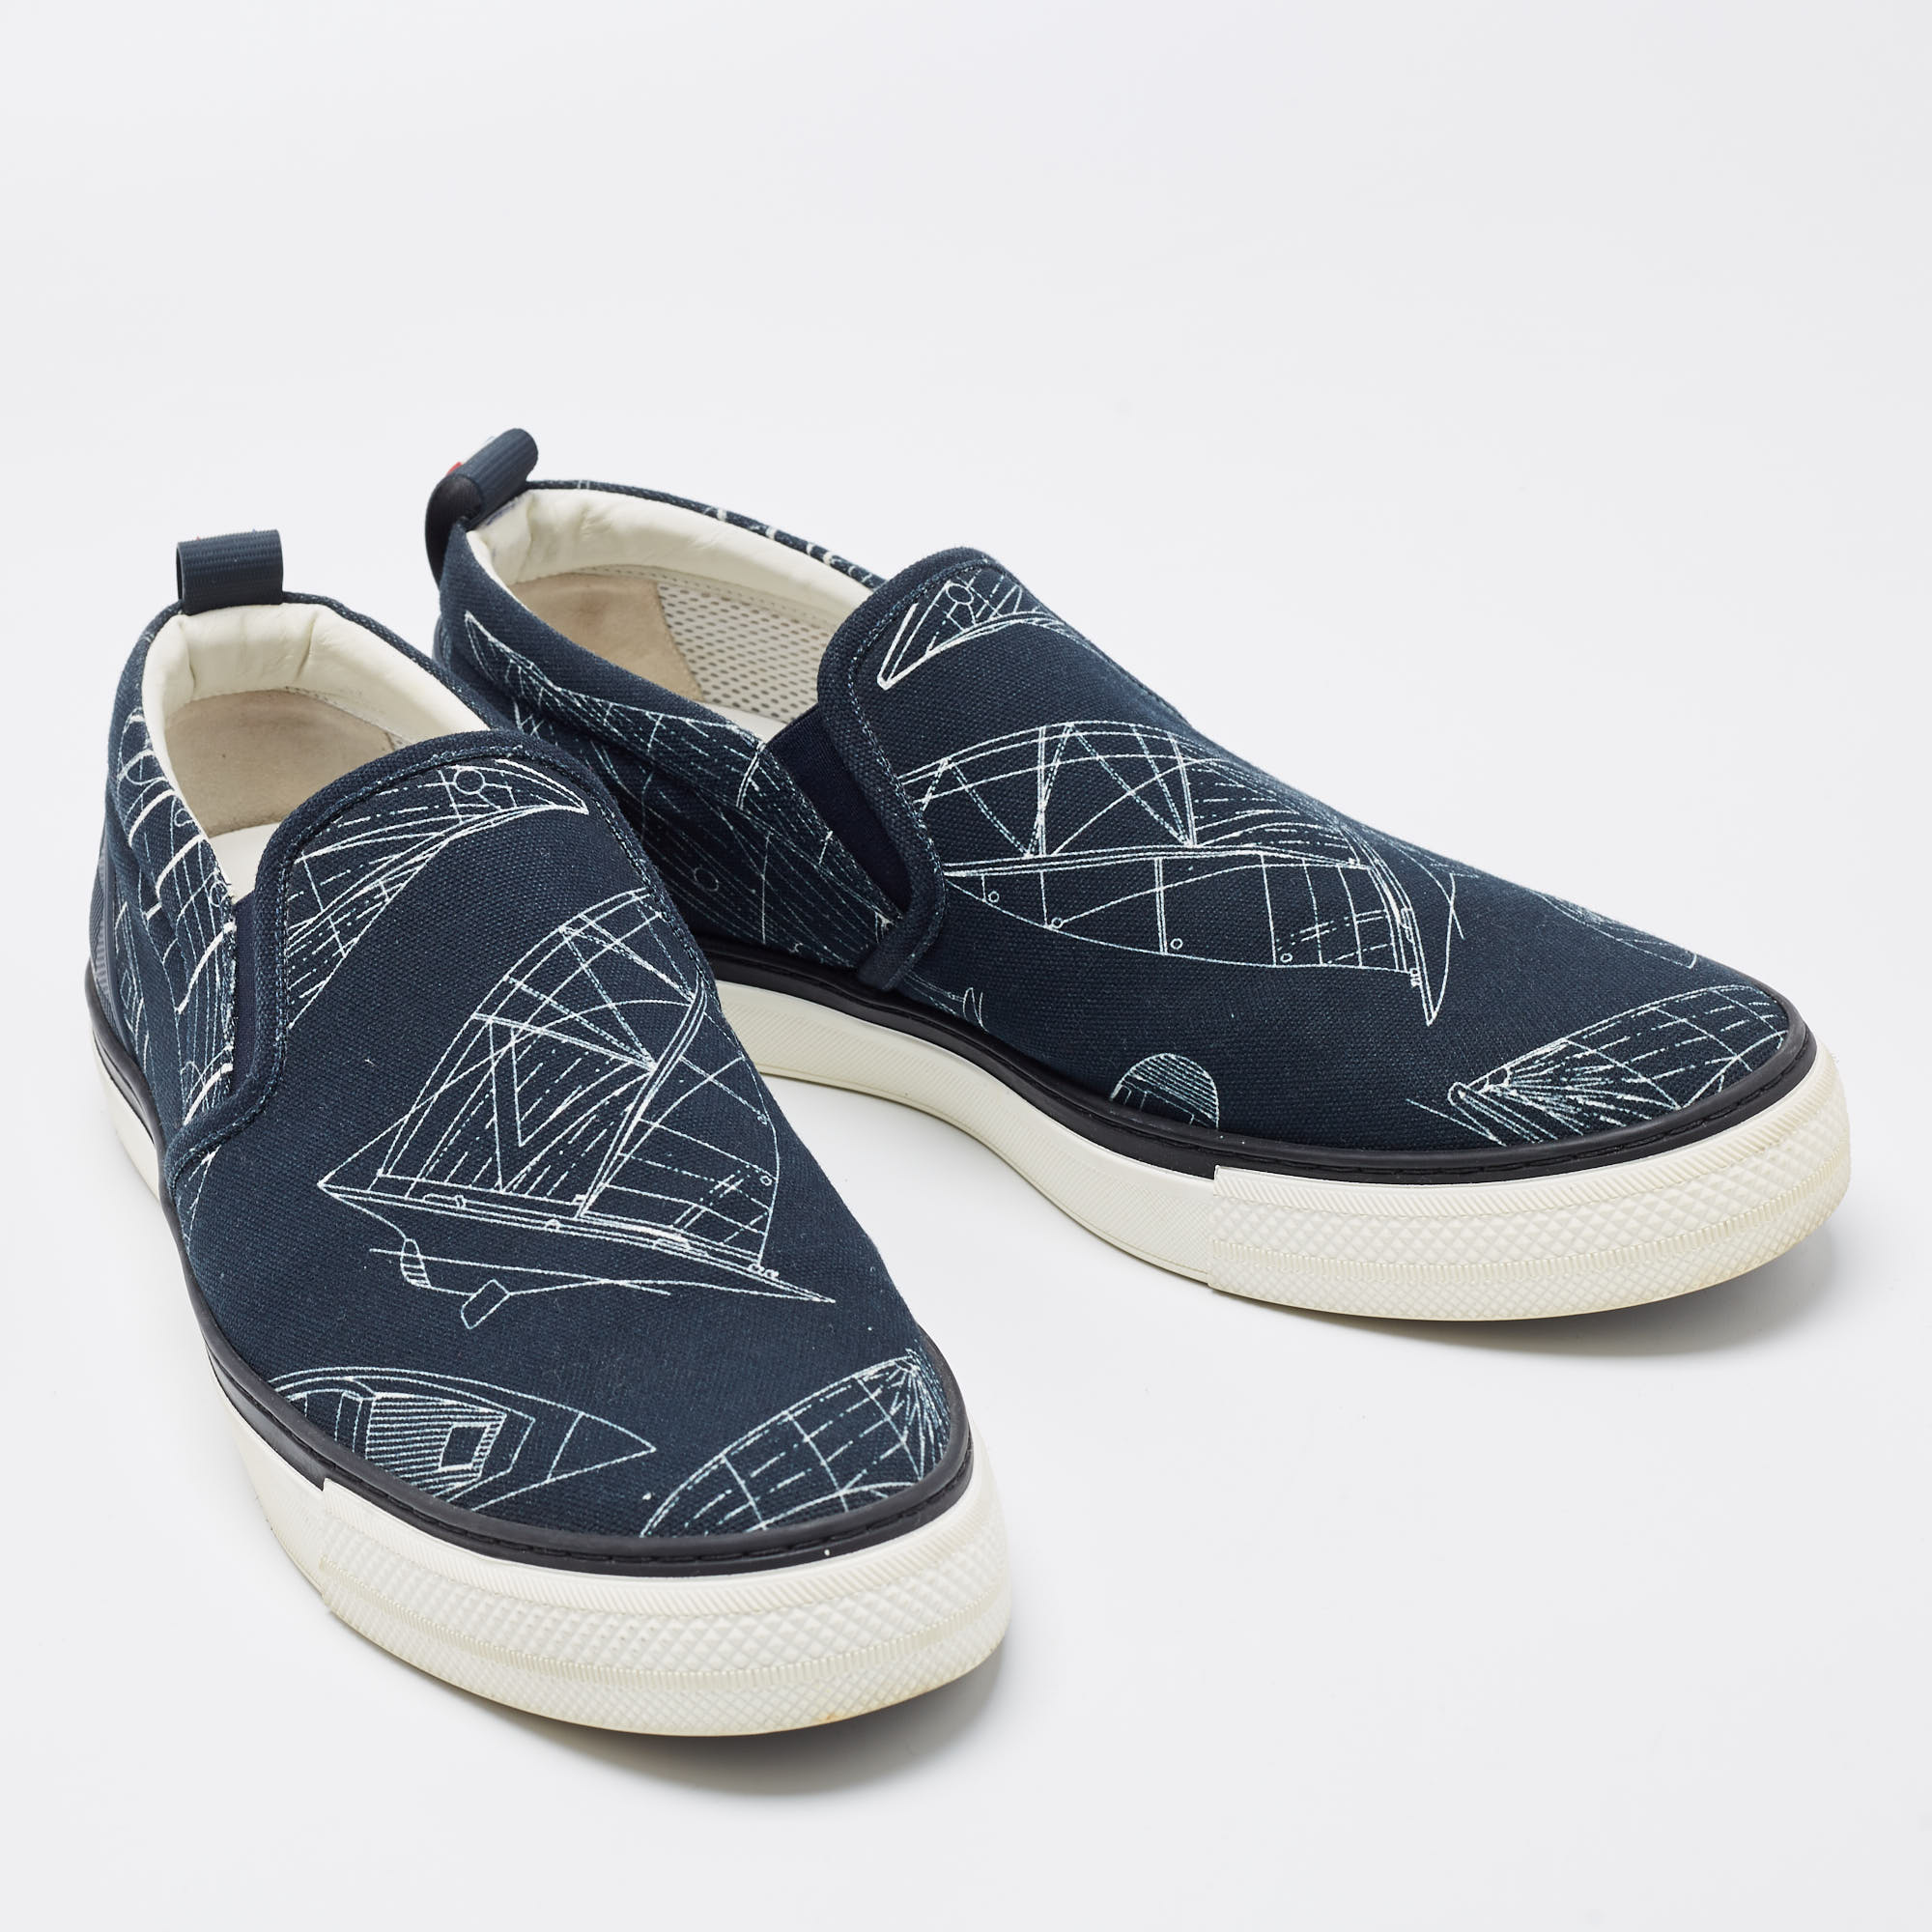 Louis Vuitton Navy Blue Canvas Victory Boats Slip On Sneakers Size 43.5